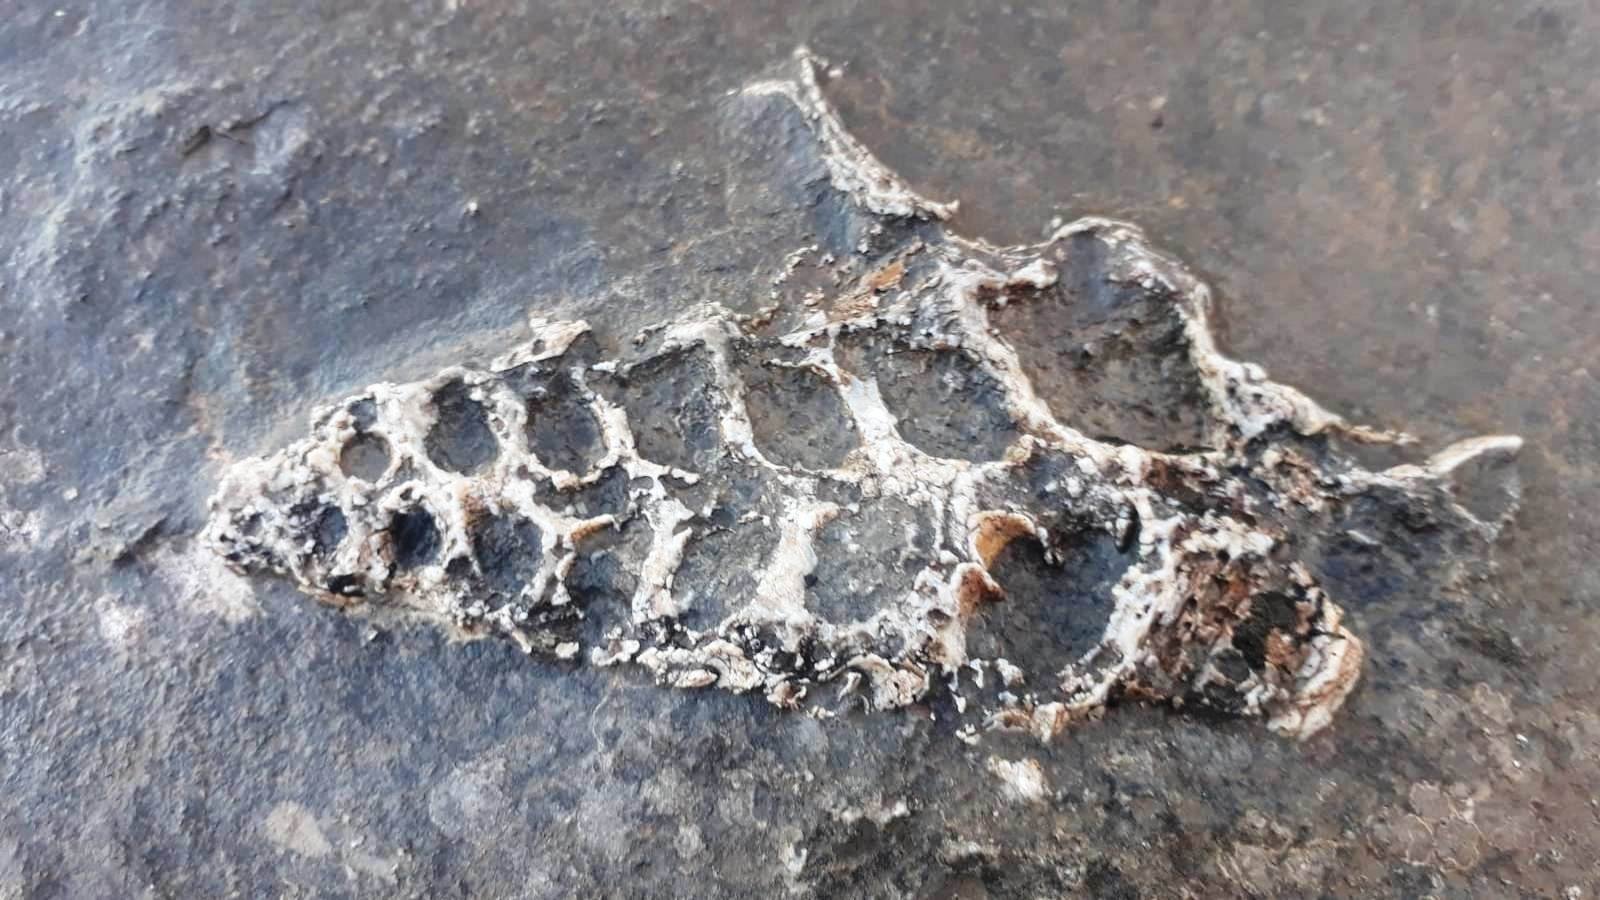 The gastropod fossil, thought to be 70 million years old, was found etched on a rock in Adıyaman in southeastern Turkey on March 1, 2021. (DHA Photo)